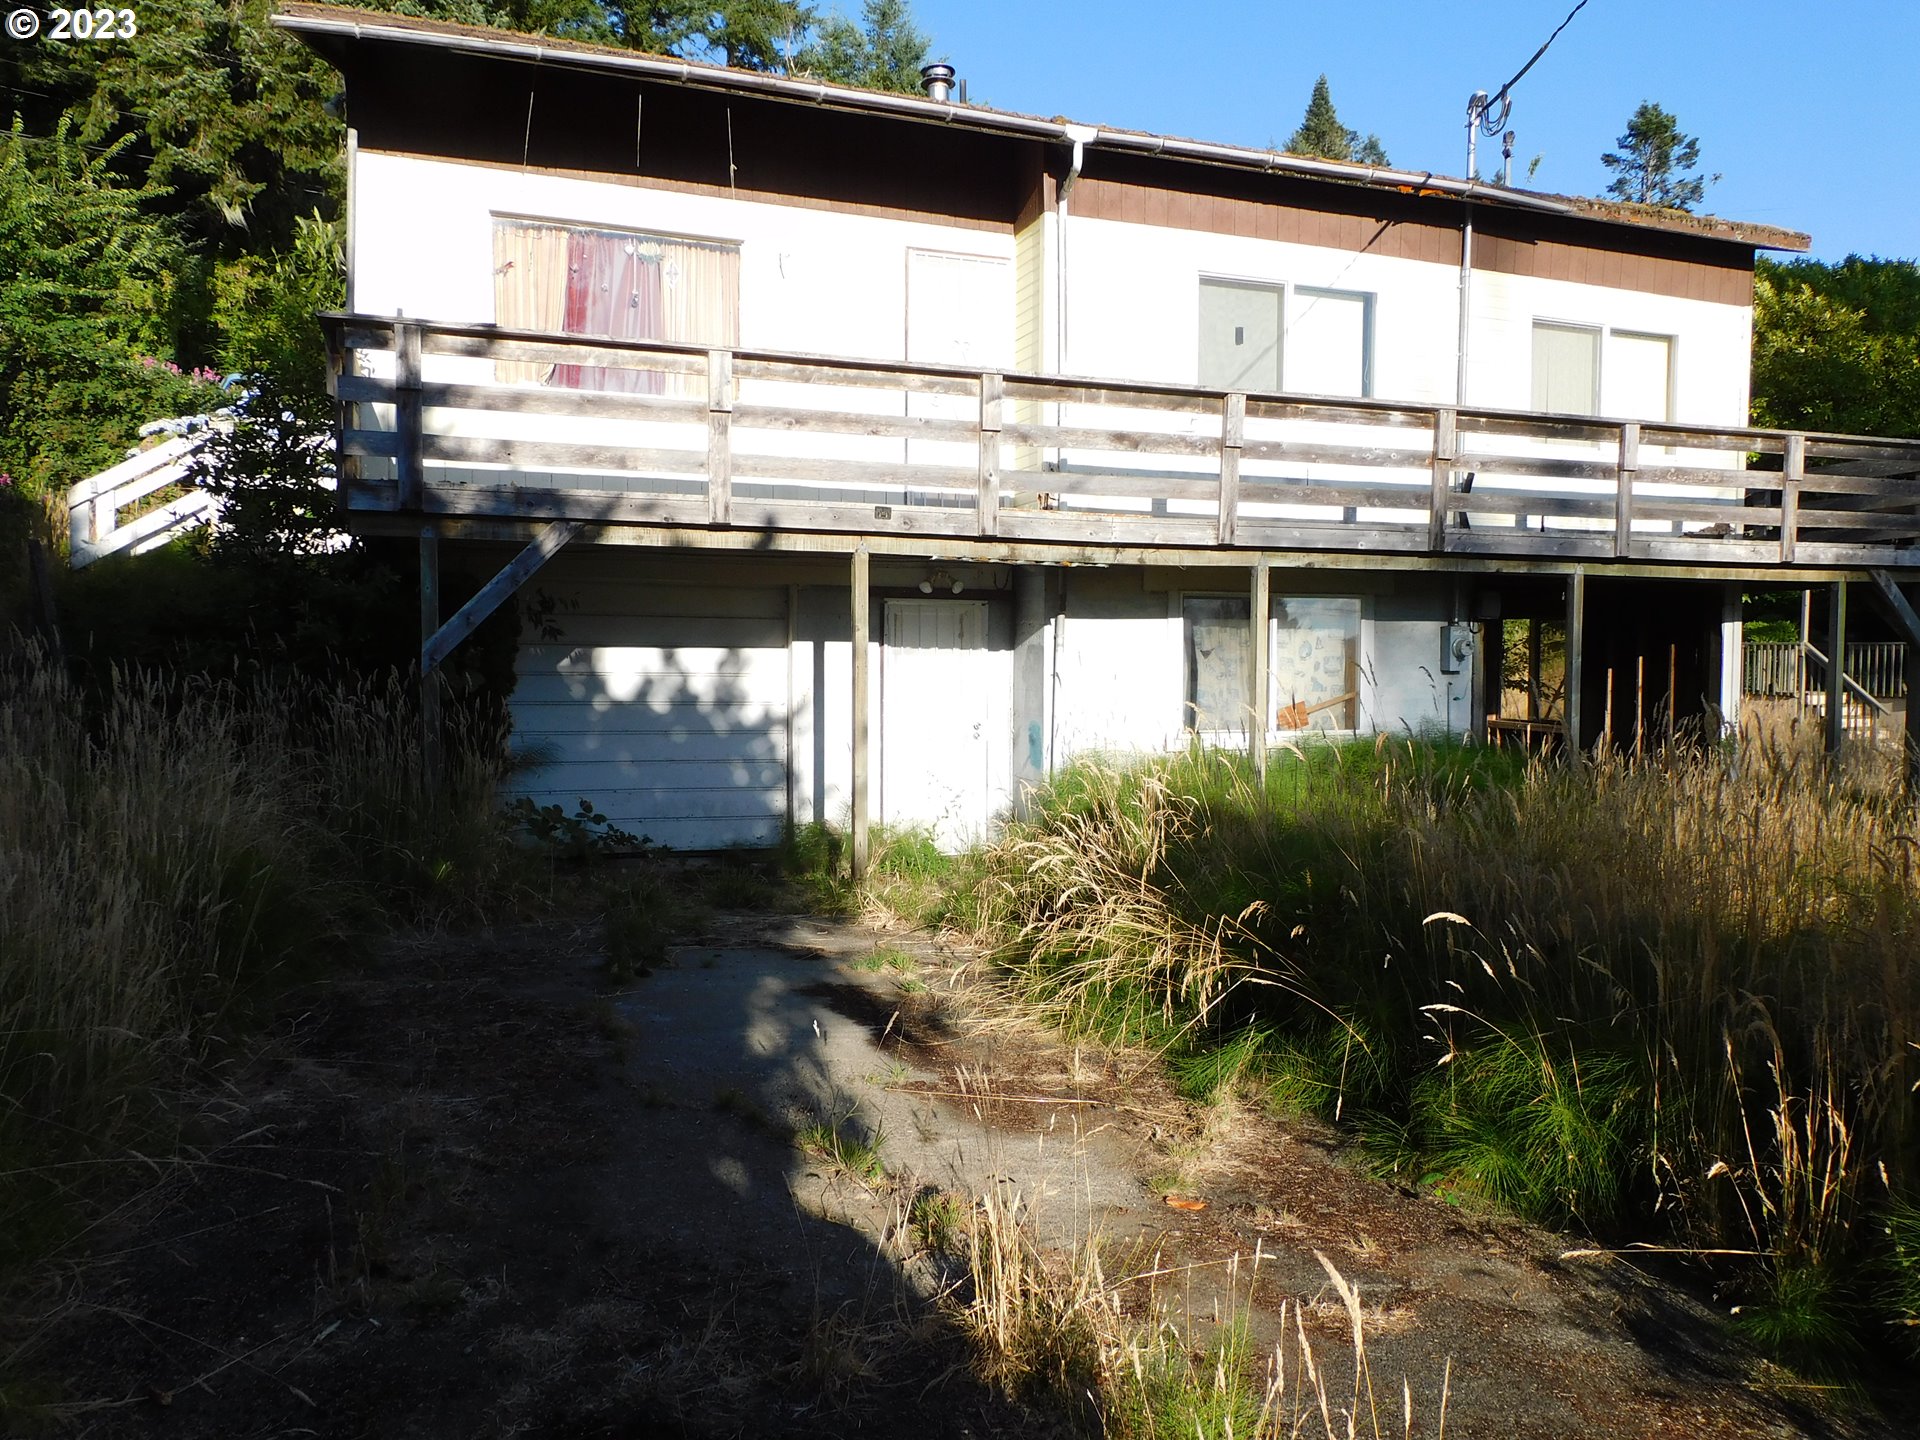 945 E 5TH ST, Coquille, OR 97423